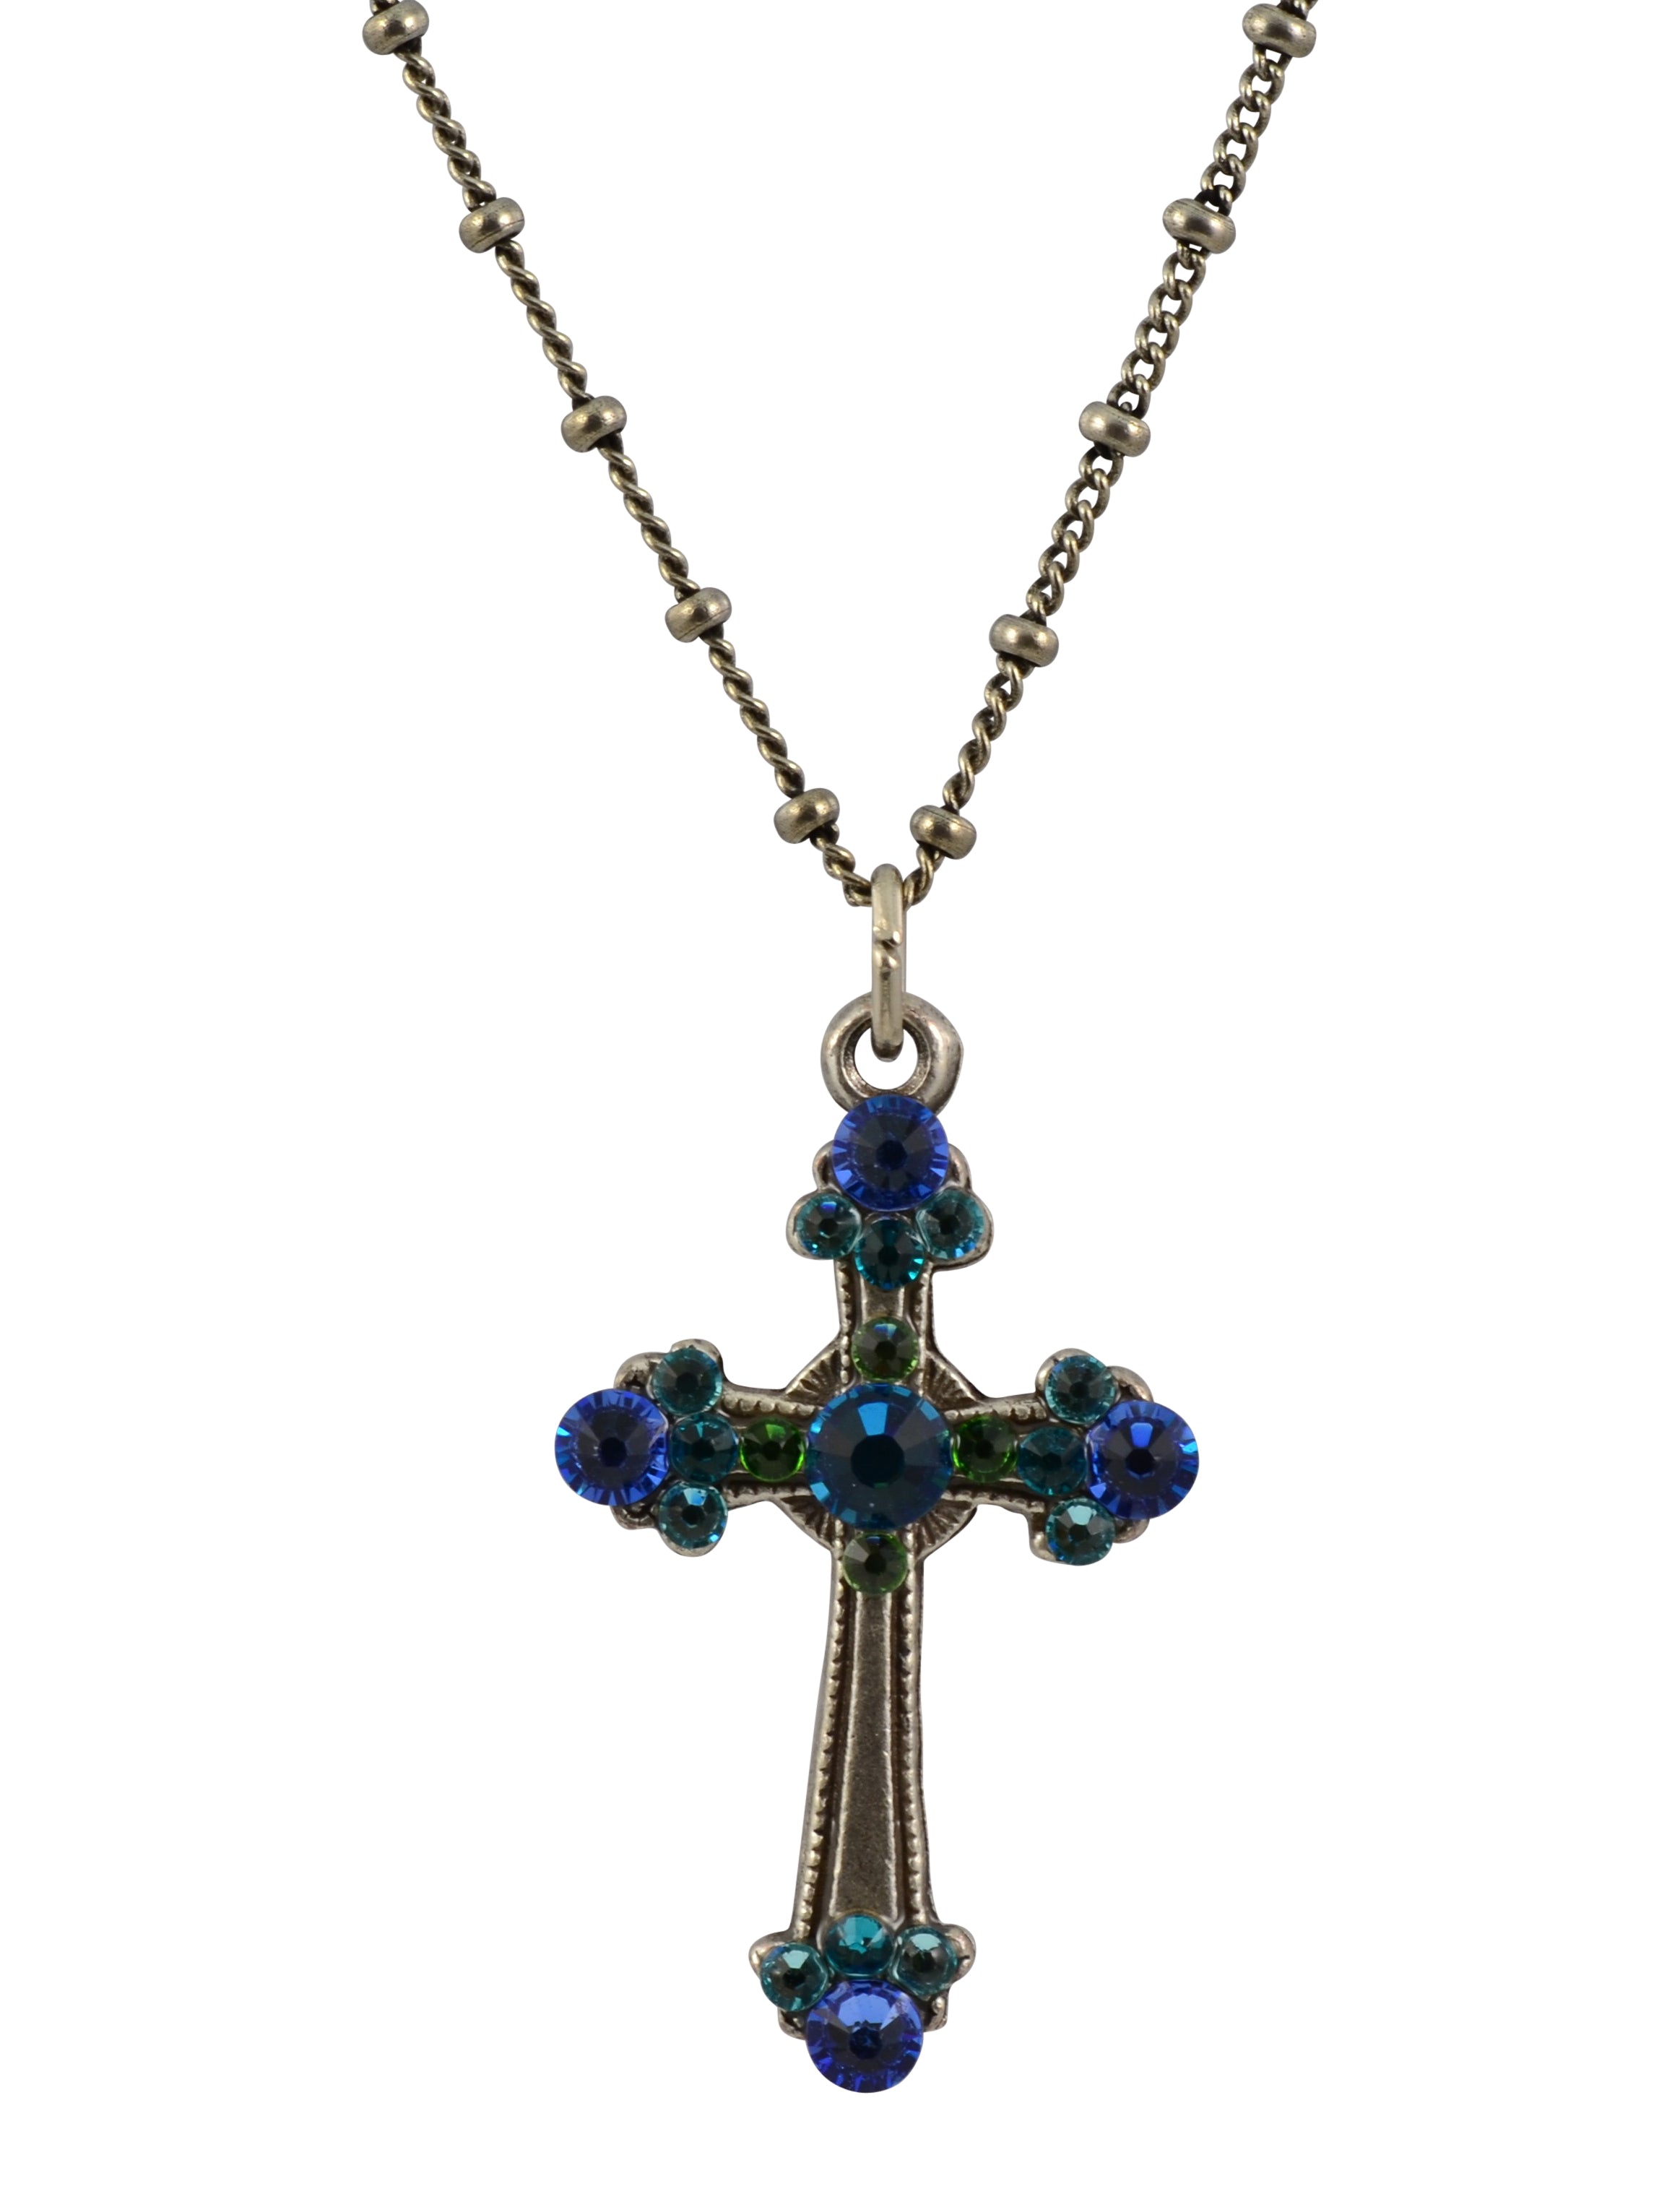 Anne Koplik Cross Necklace, Silver Plated Pendant with crystals, 18"